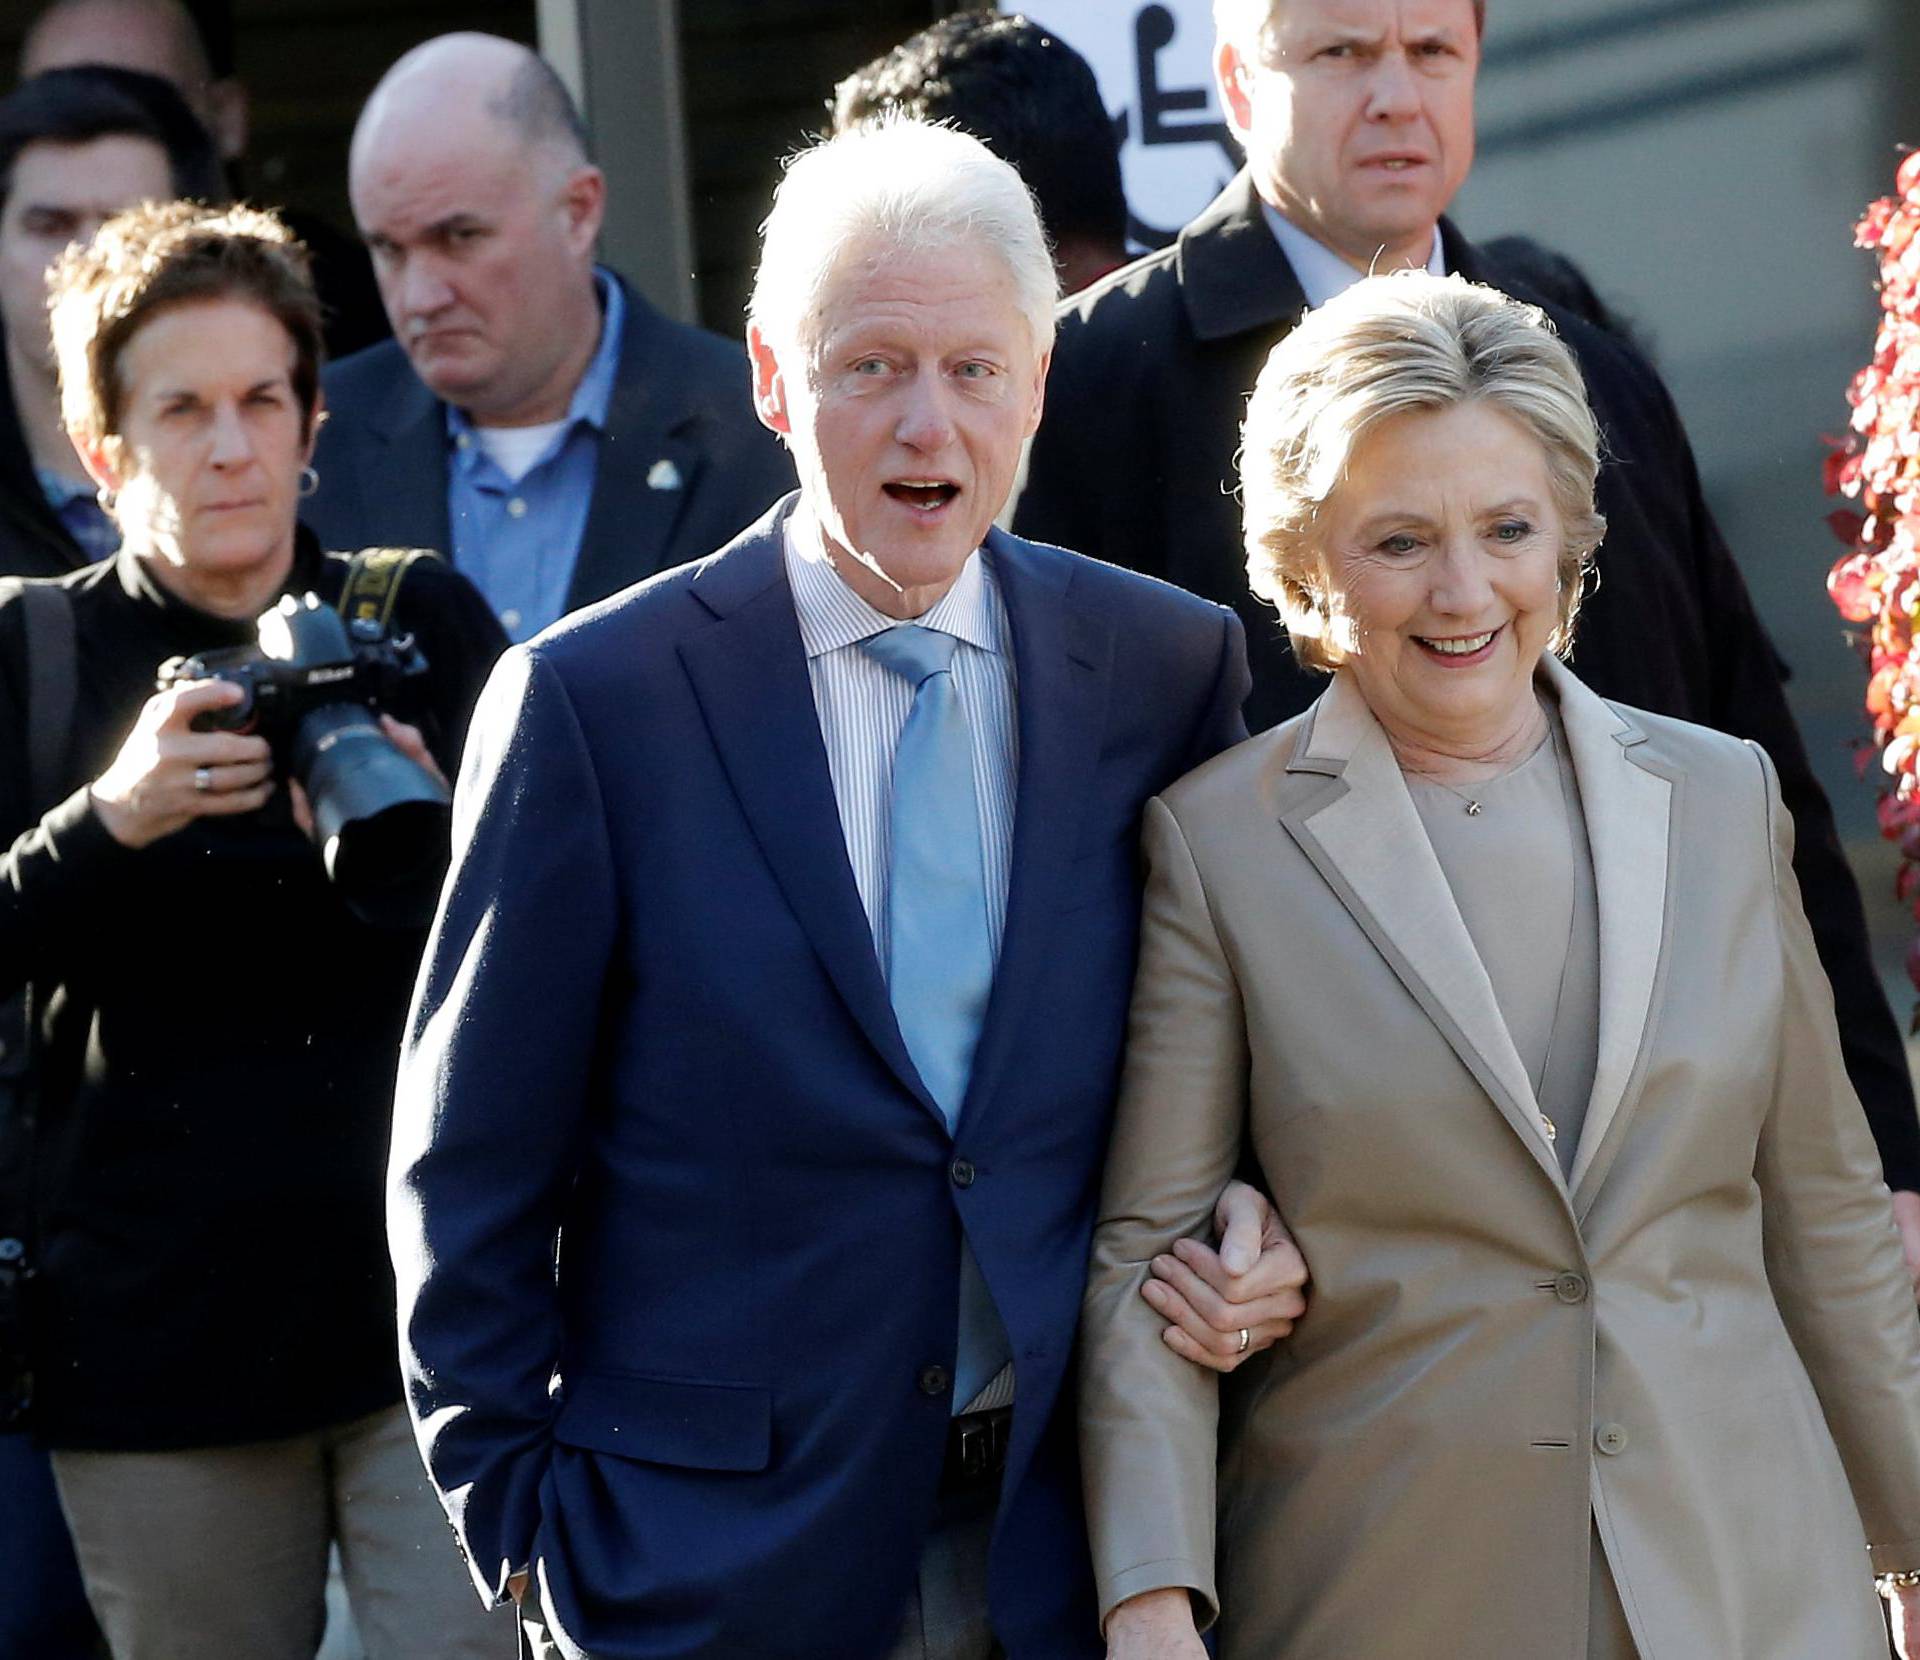 Democratic U.S. presidential nominee Hillary Clinton and her husband former U.S. president Bill Clinton depart after voting in the U.S. presidential election at the Grafflin Elementary School in Chappaqua